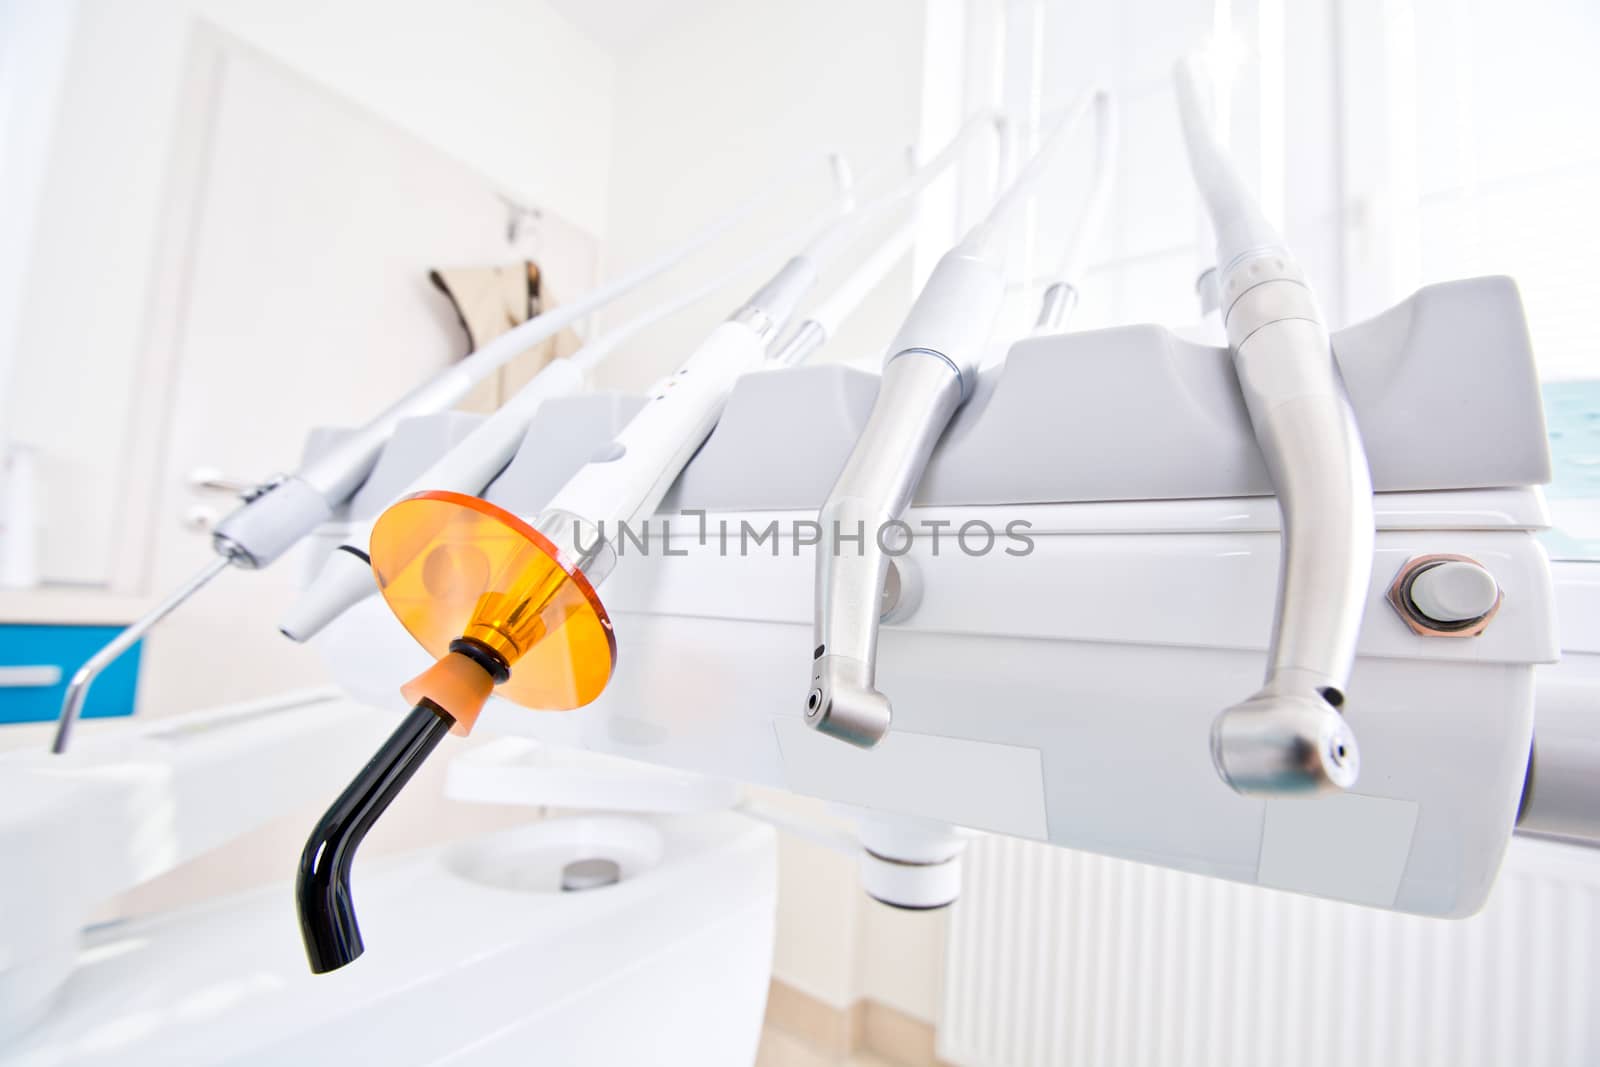 Professional Dentist tools in the dental office. Dental Hygiene and Health conceptual image.